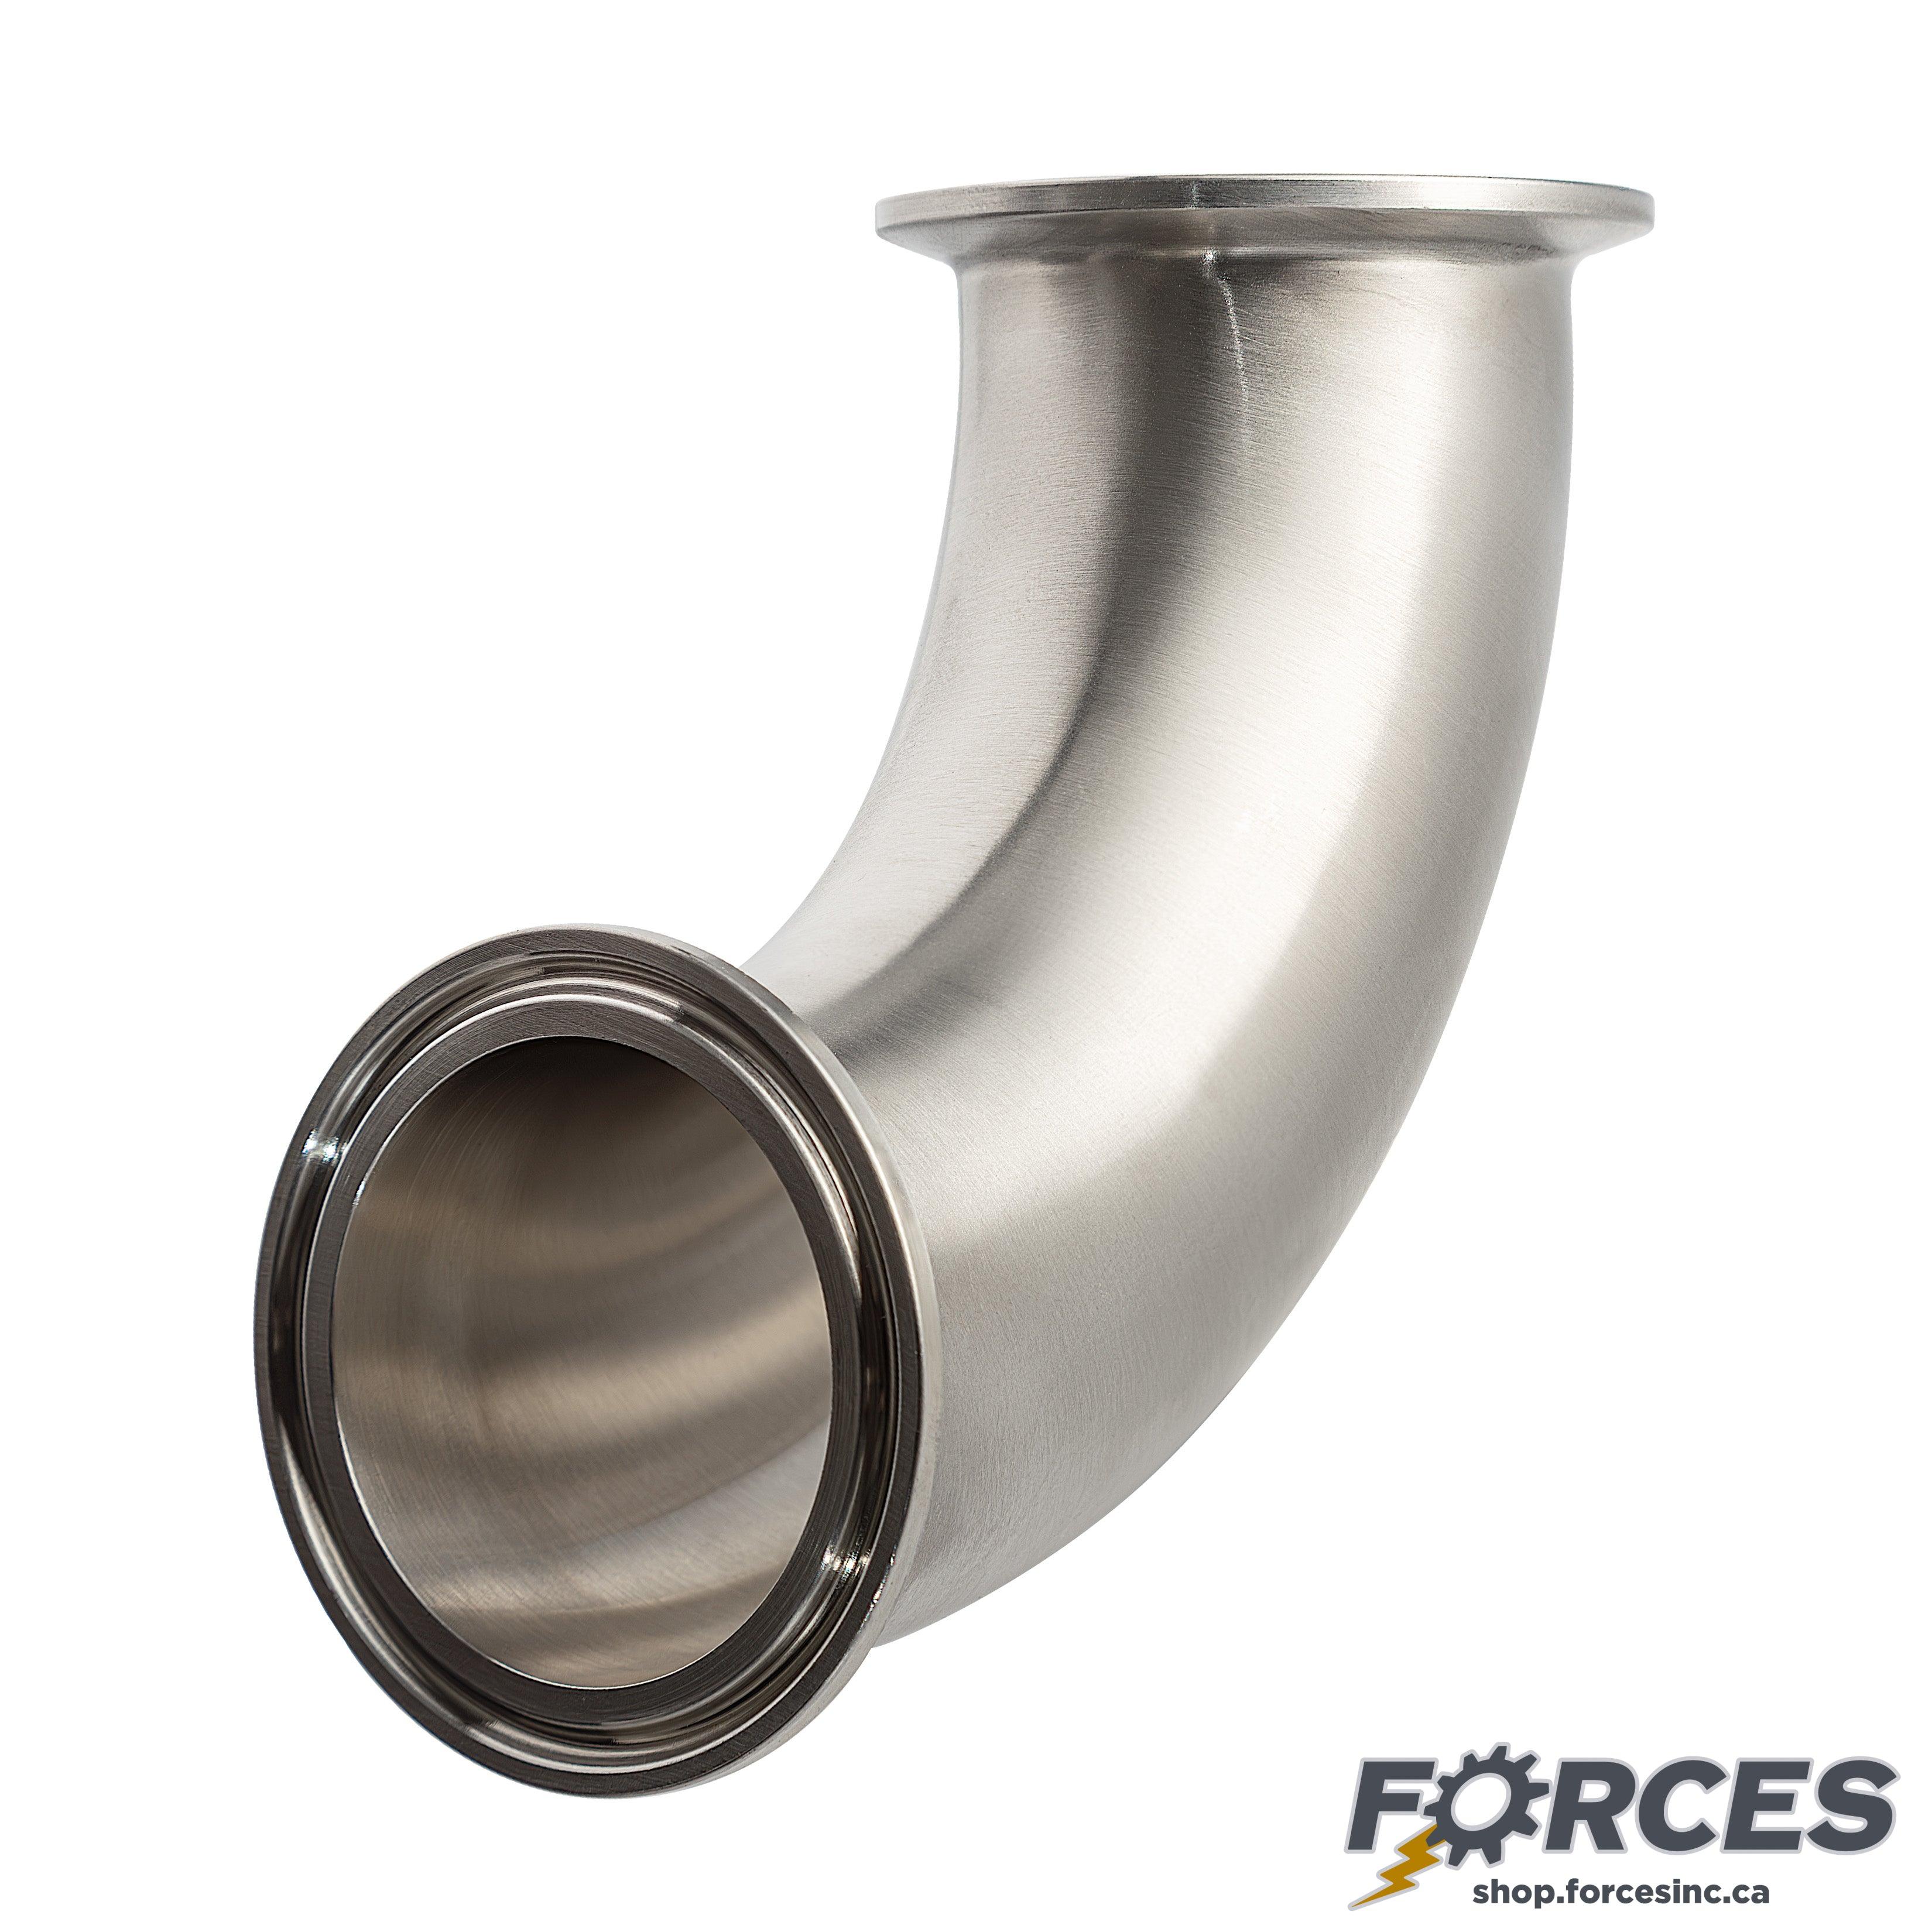 8" Tri-Clamp 90° Elbow - Stainless Steel 304 - Forces Inc